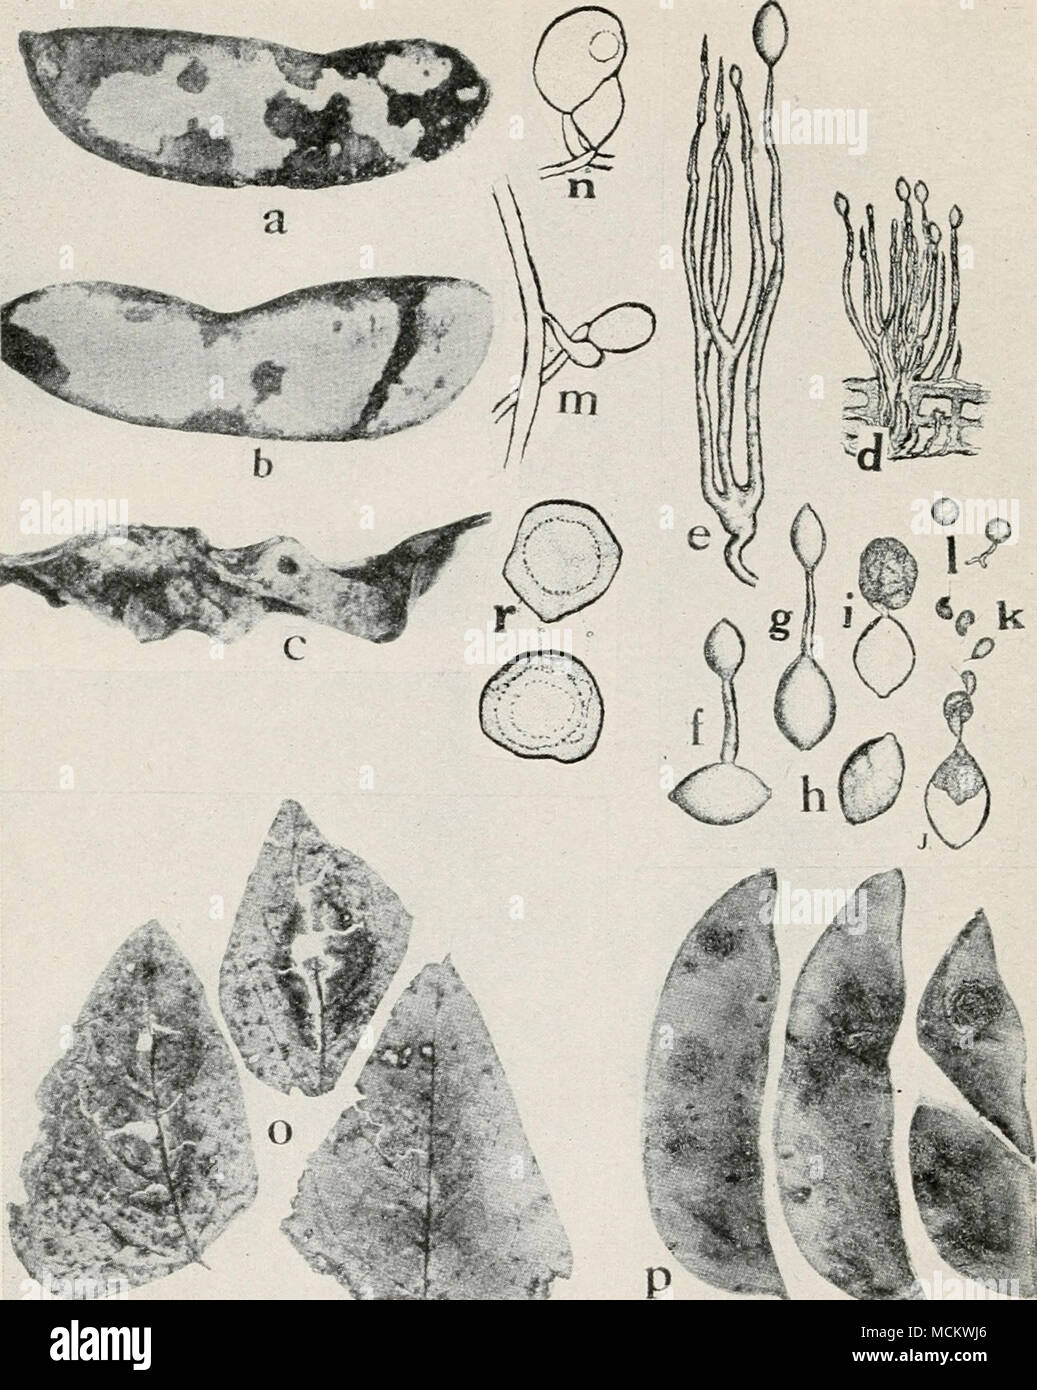 . Fig. 48. Diseases of Lima Bean. a. h. c. different stages of downy mildew on pods, d. tuft of conidiophores and conidia of Phylhophthora phaseoli, e. same as d. but greatly enlarged, /. g. conidia germinating by means of a germ tube, h. i. j. k. germination of conidia by means of zoospores, /. germinating zoospores {d. to /. after Thaxter), m. n. fertilization of the oogonium by the antheridium, o. Phoma blight on foliage, p. Phoma blight on pods (o. and p. after Halsted), r. mature oospores of P. phaseoli (a. to c, m. n. and r. after Clinton). Stock Photo